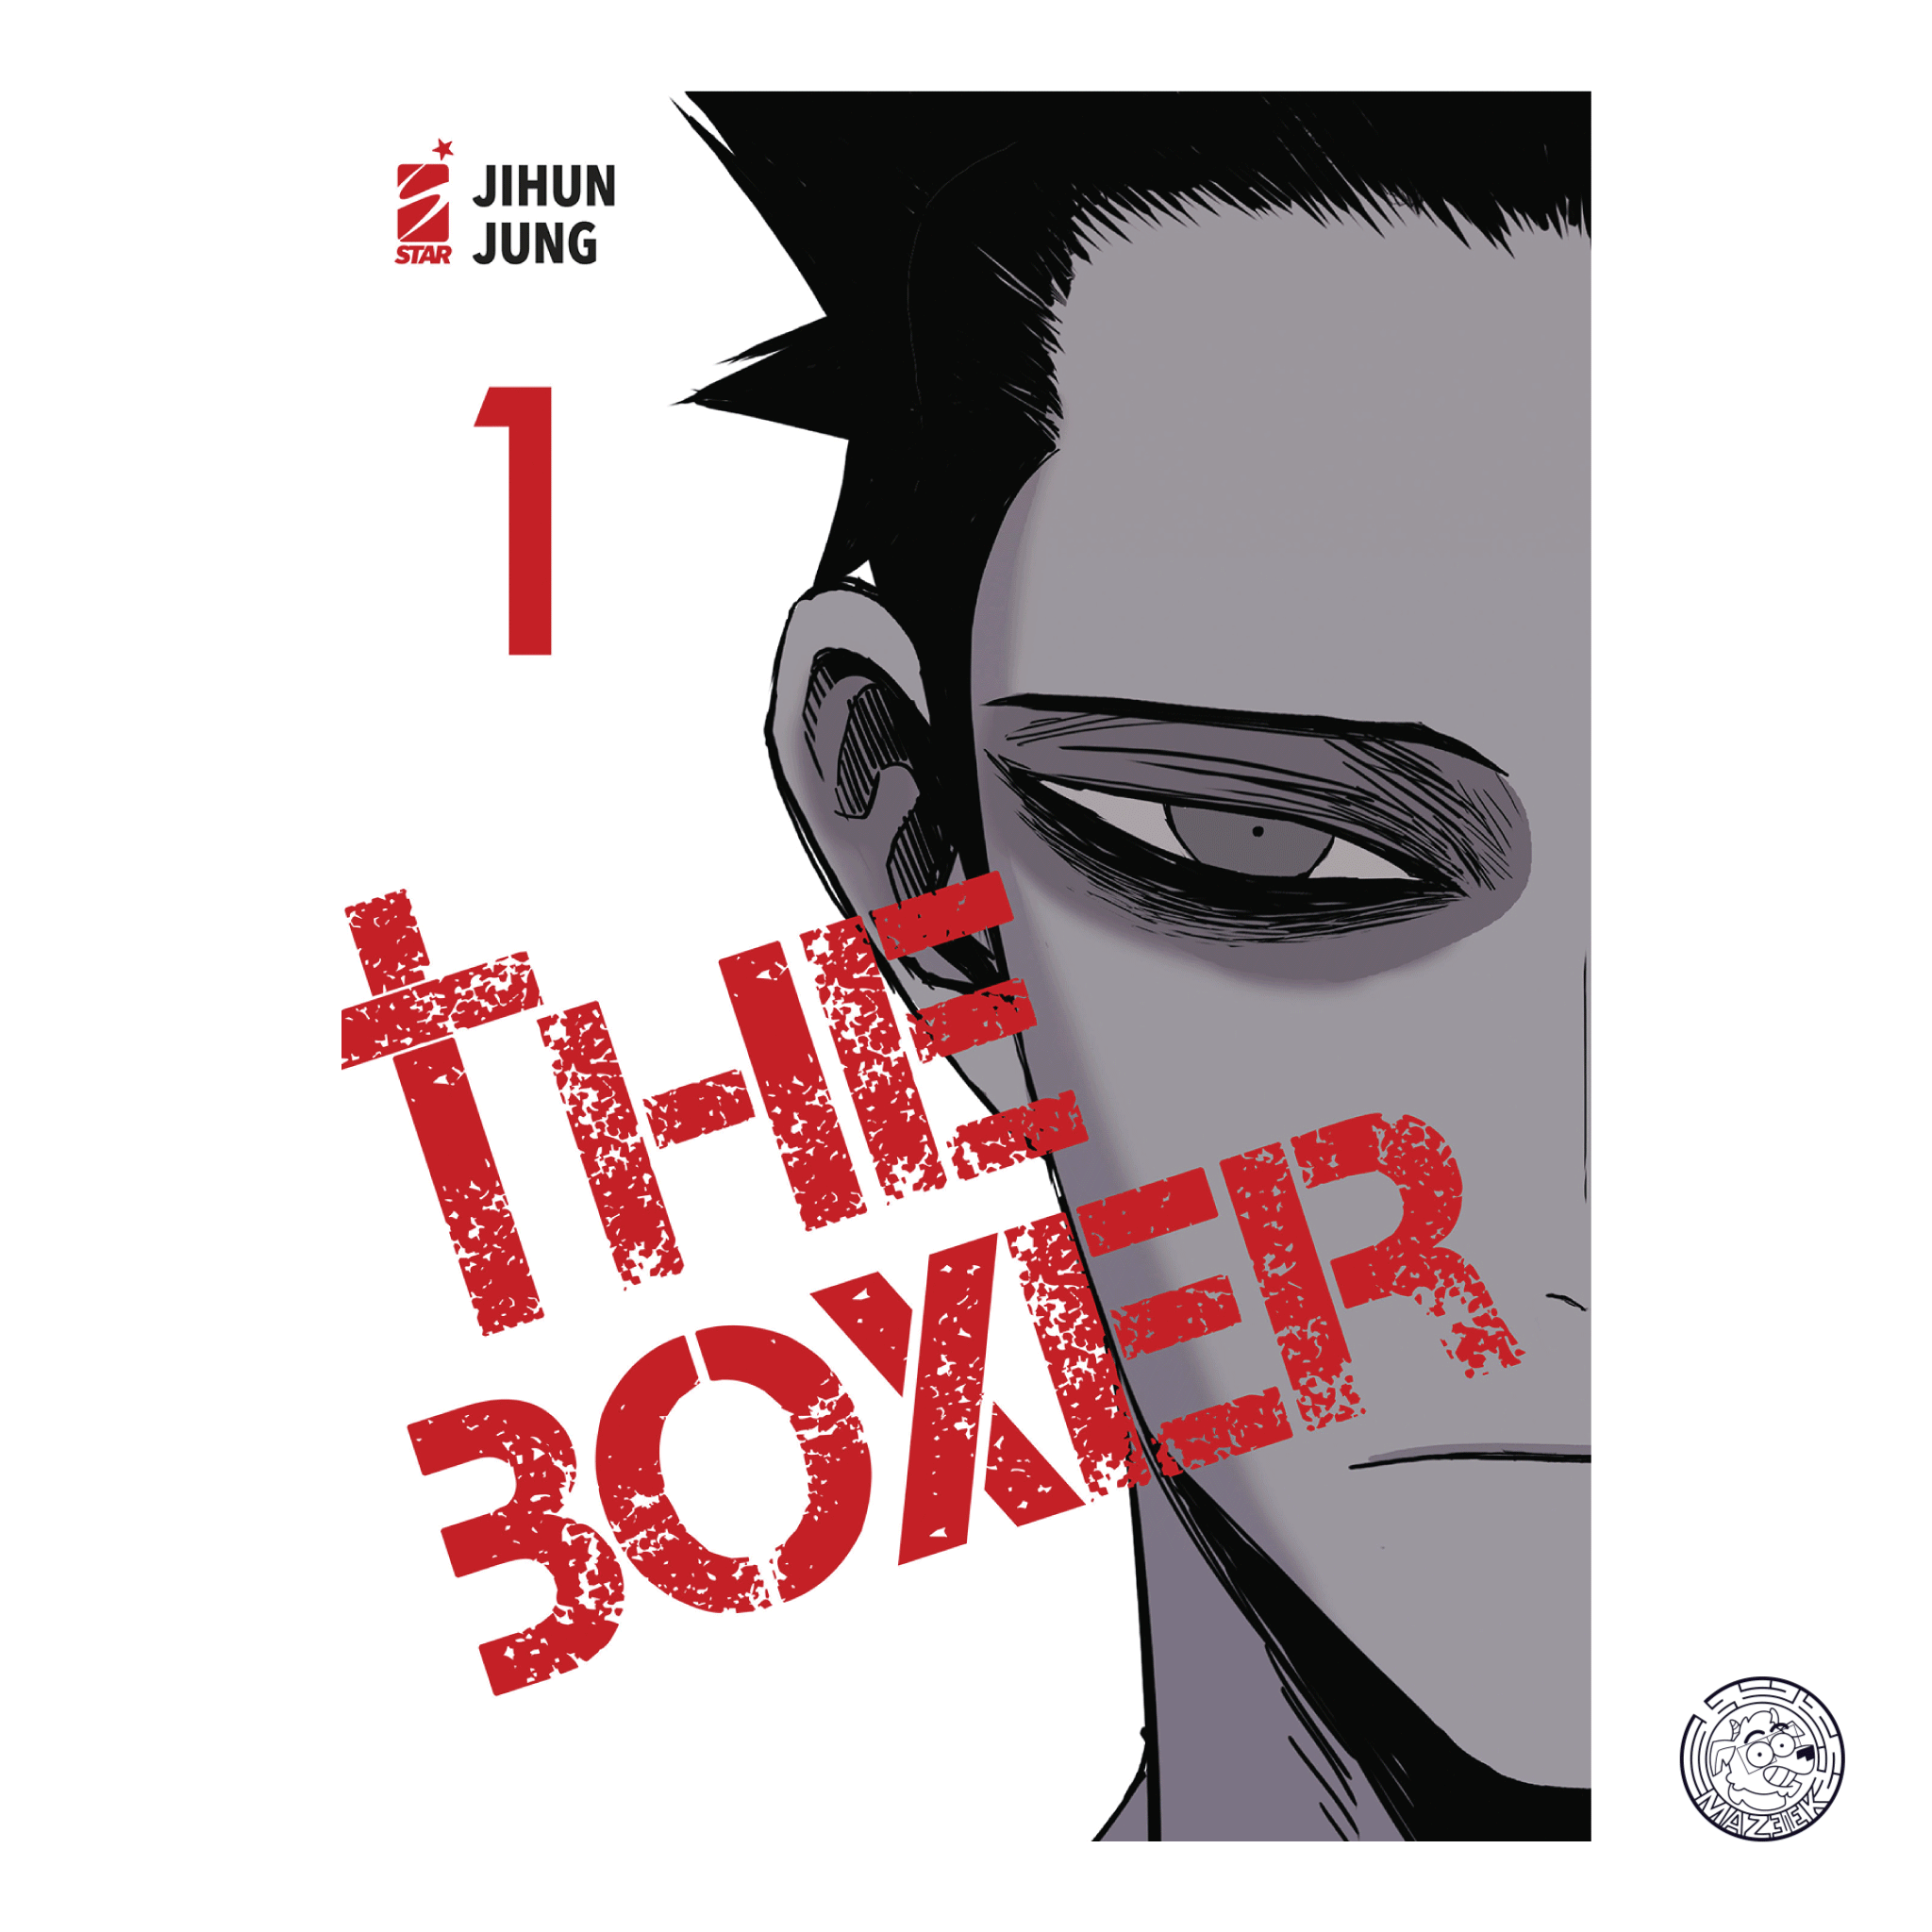 The Boxer 01